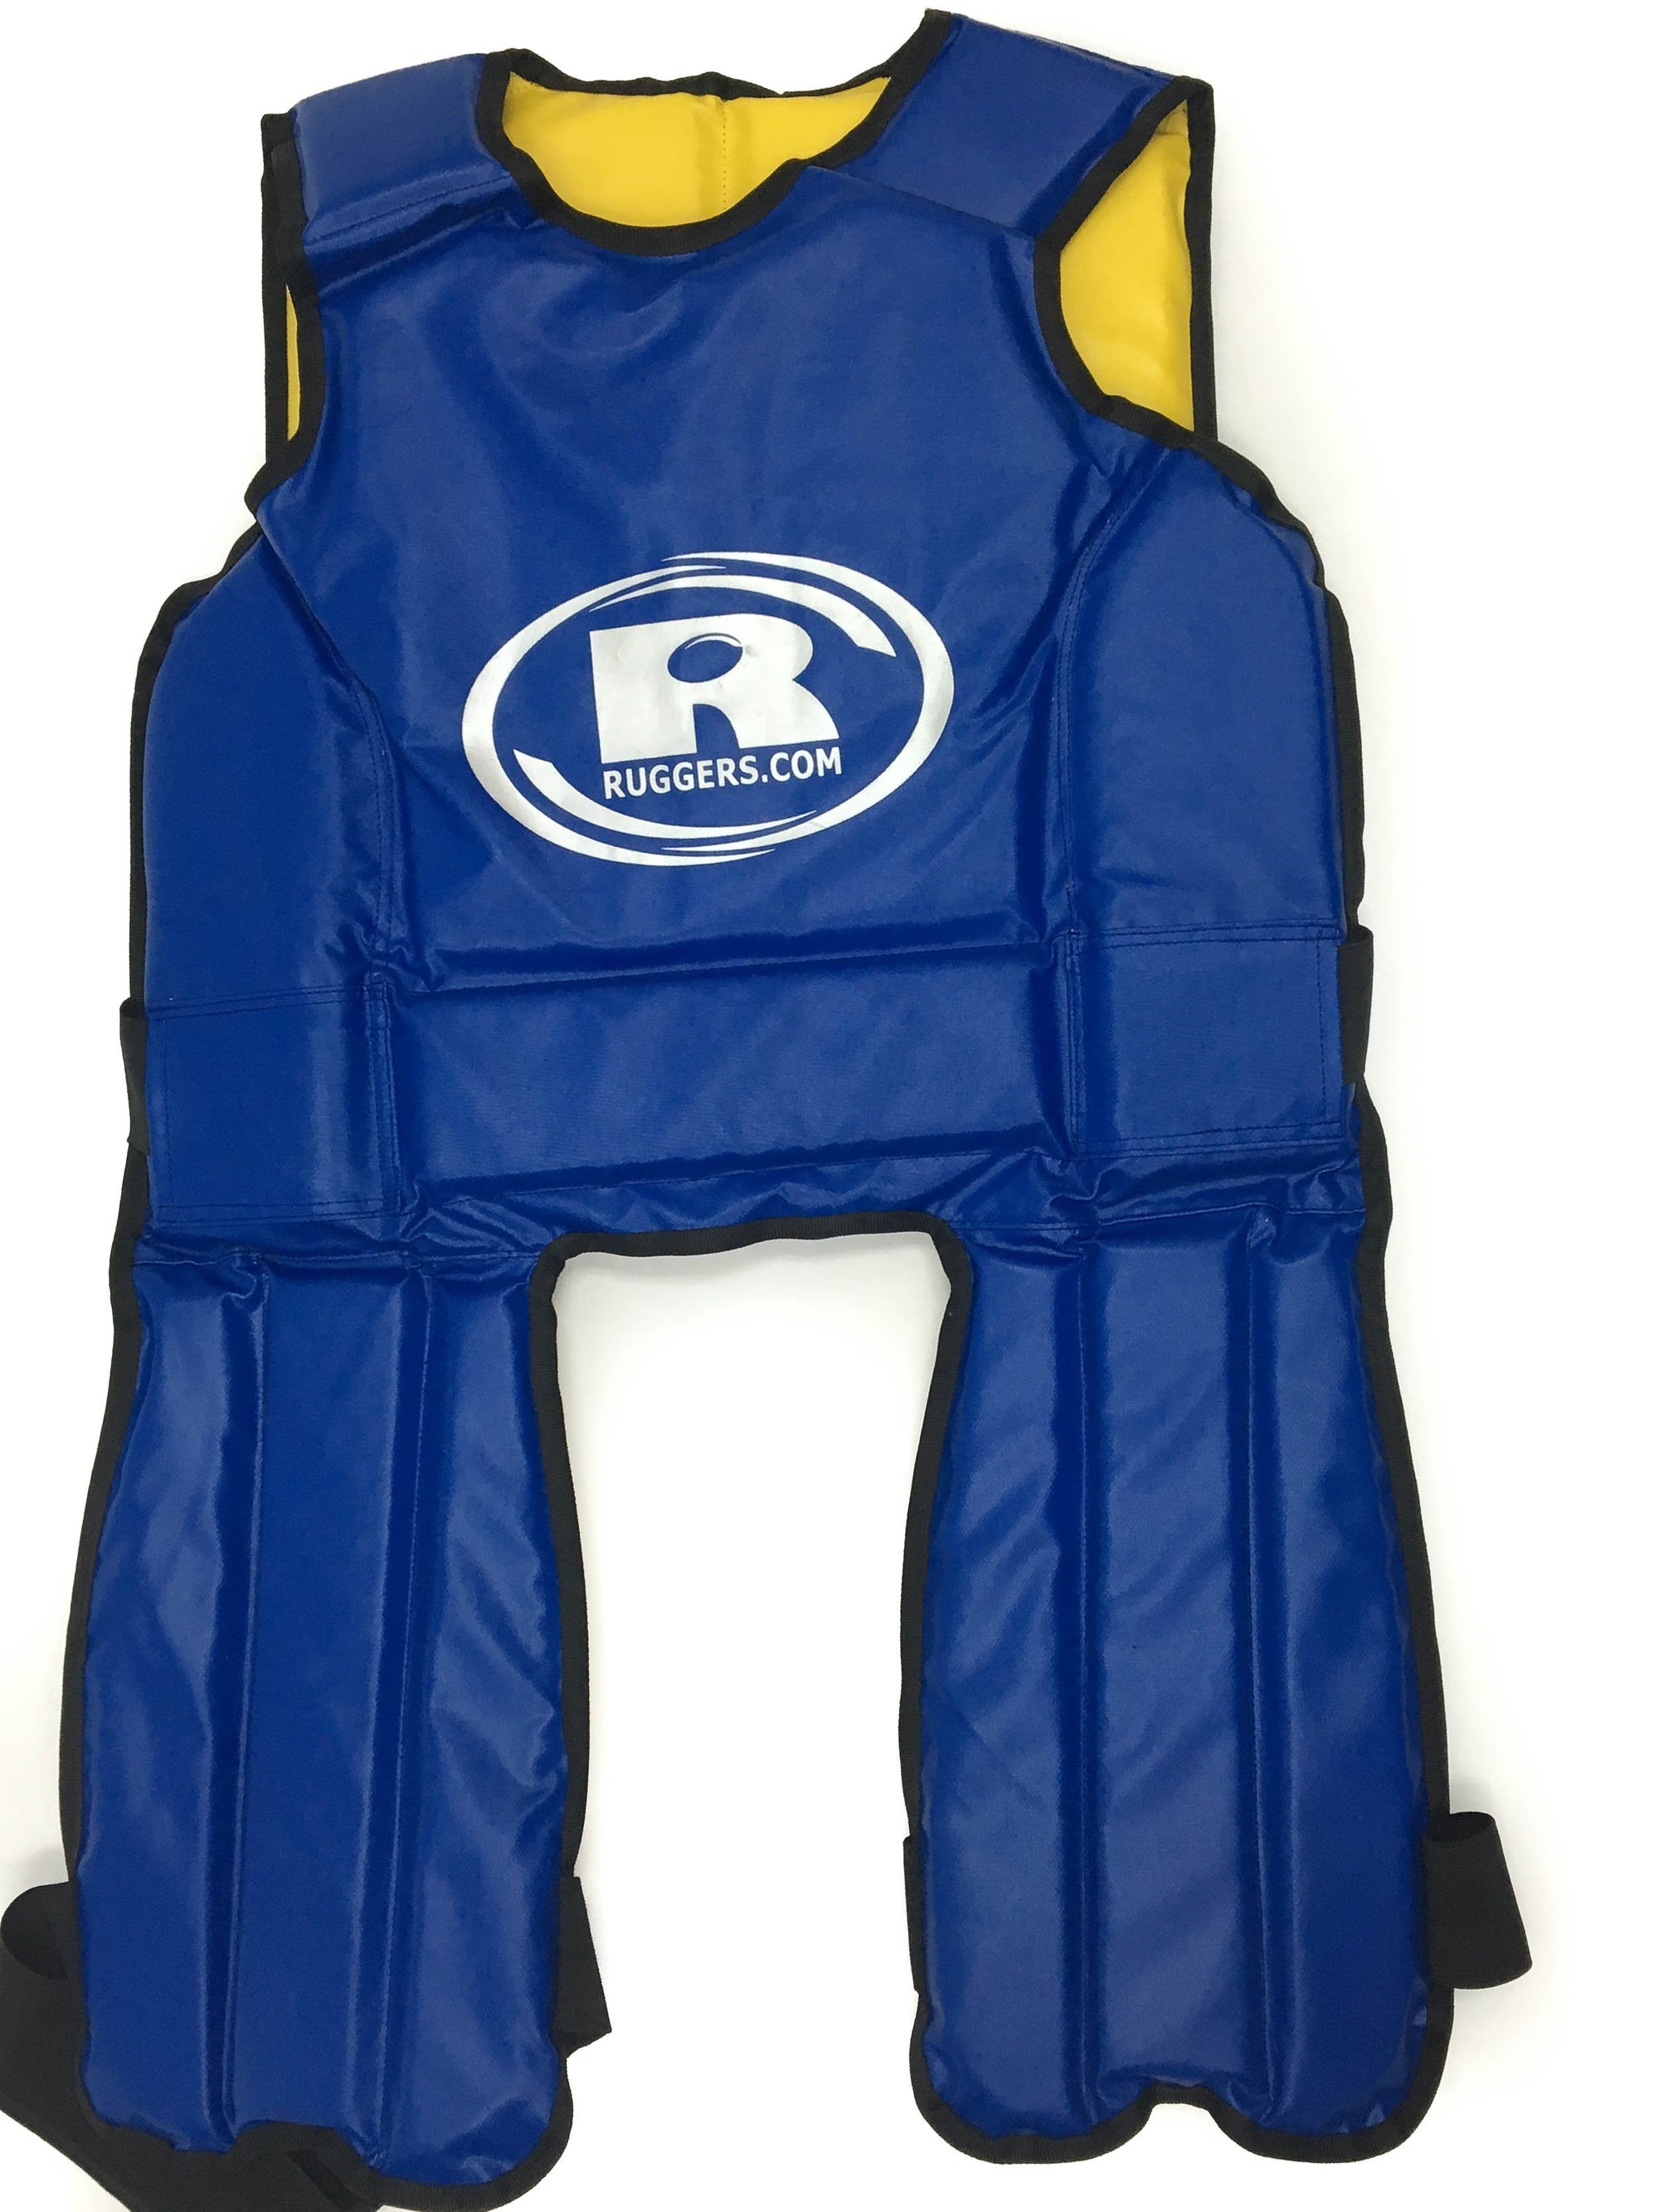 Equipment - Tackle Suit